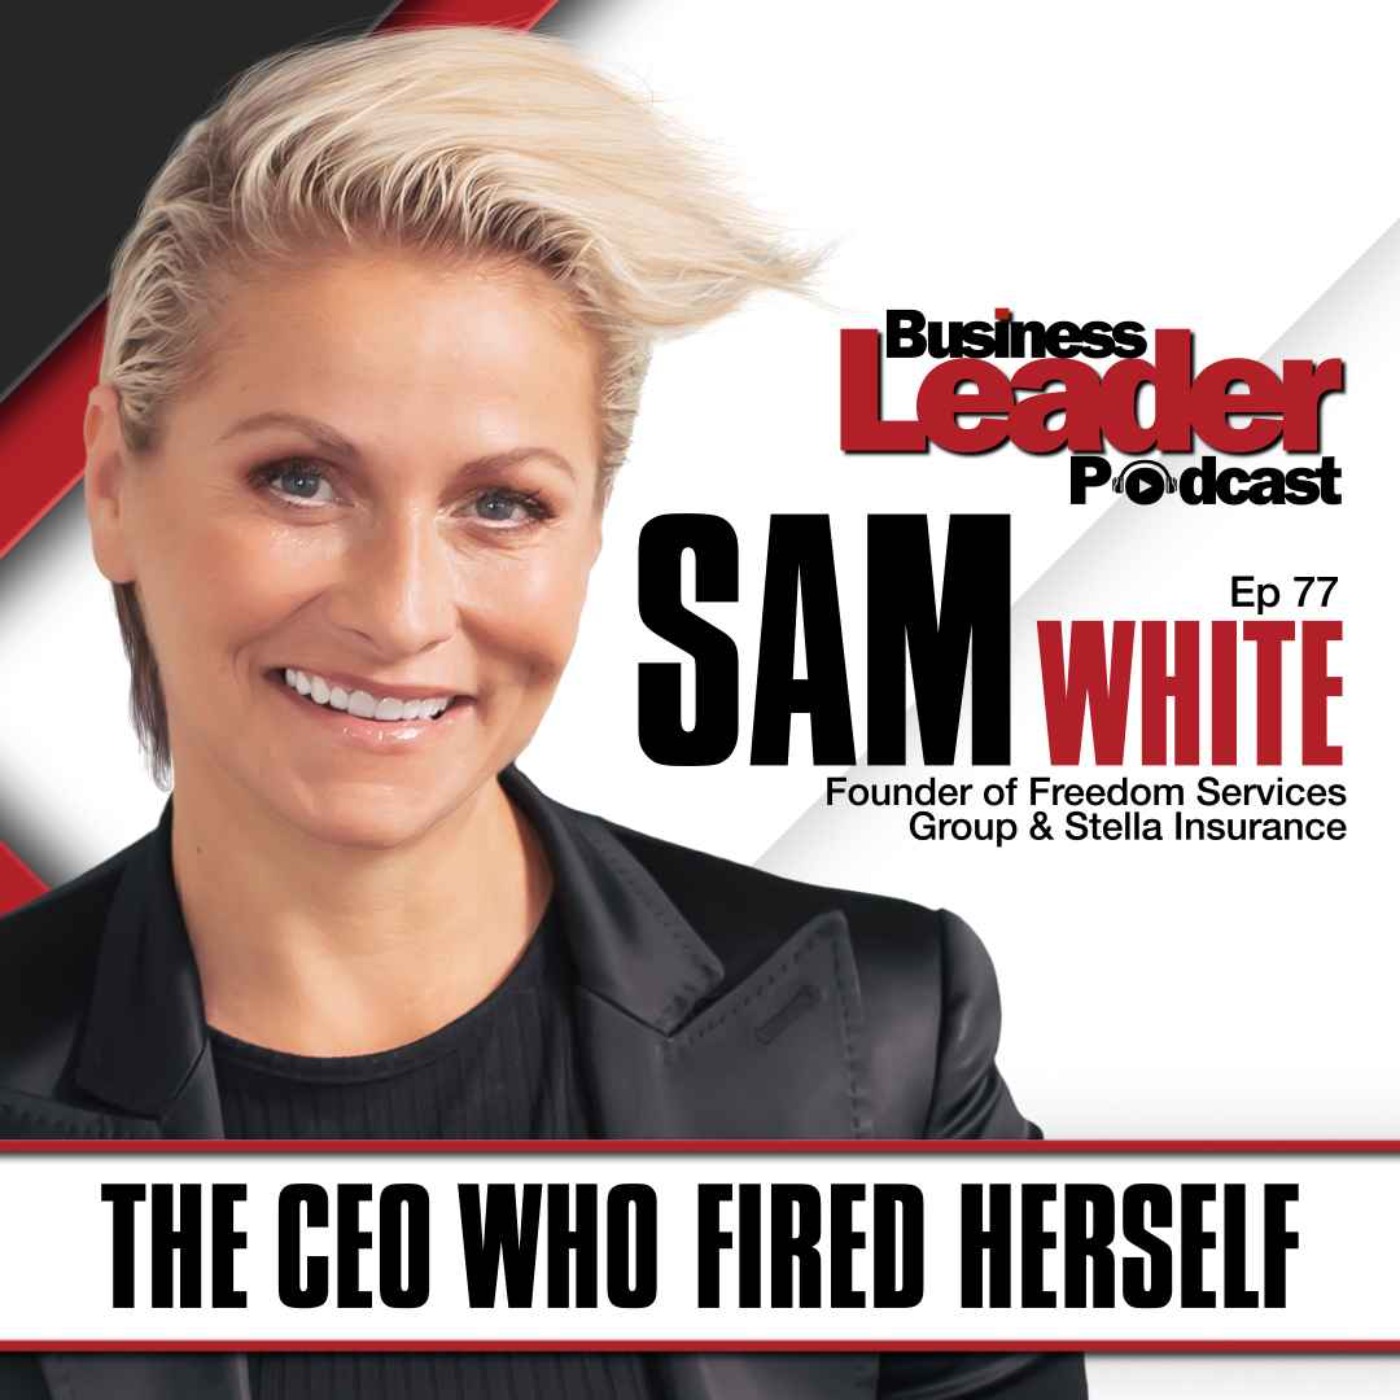 Sam White: The CEO Who Fired Herself